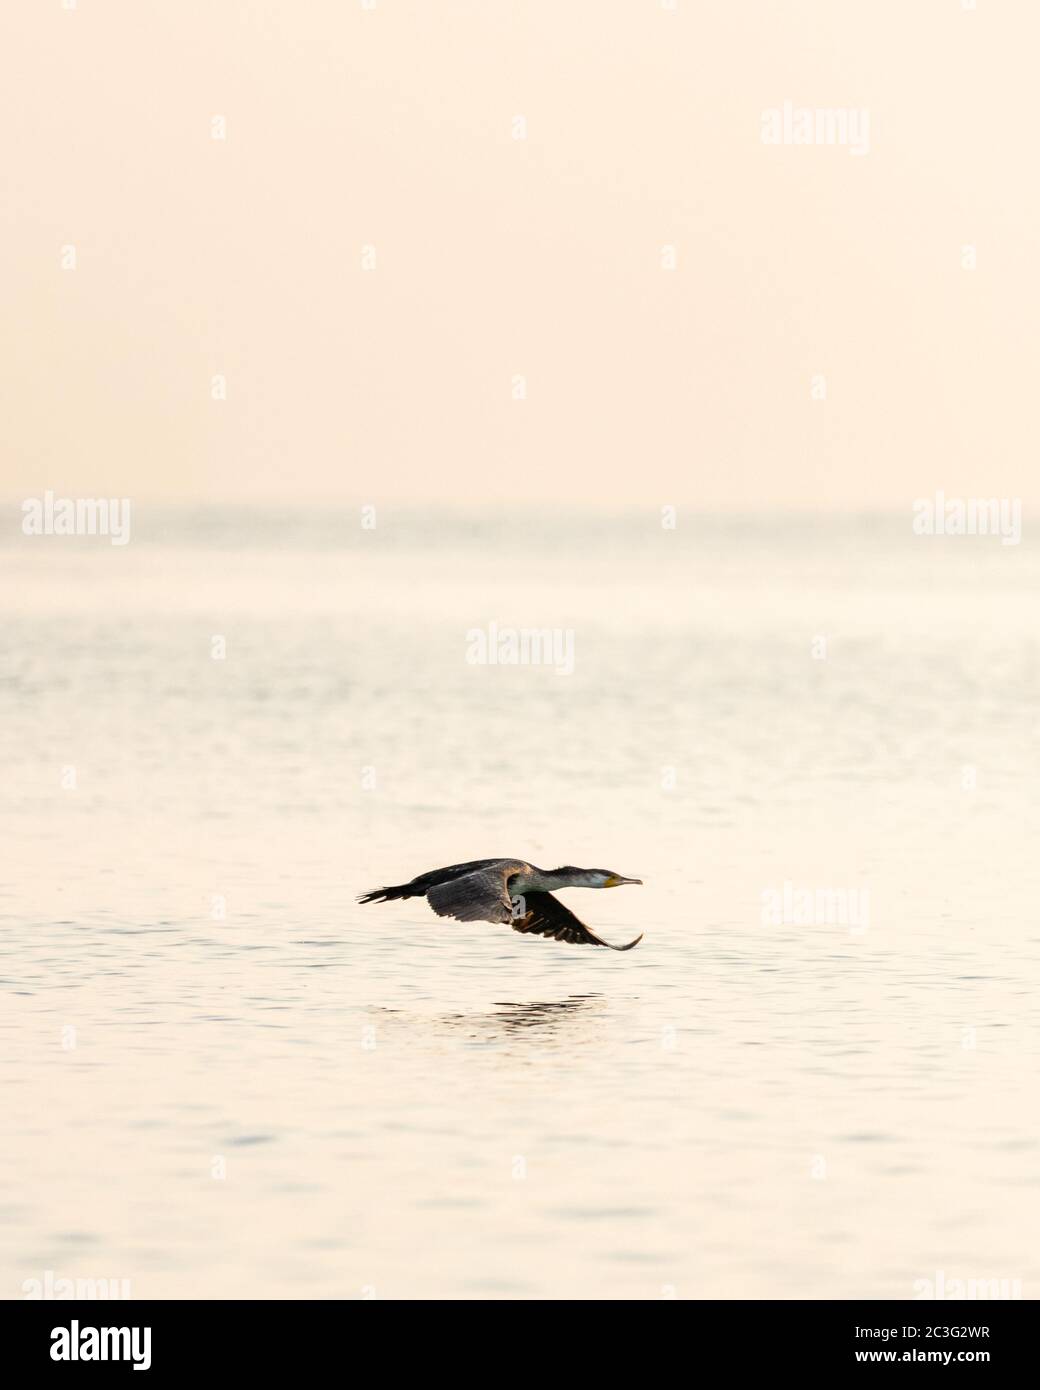 Bird flying low on water front Stock Photo